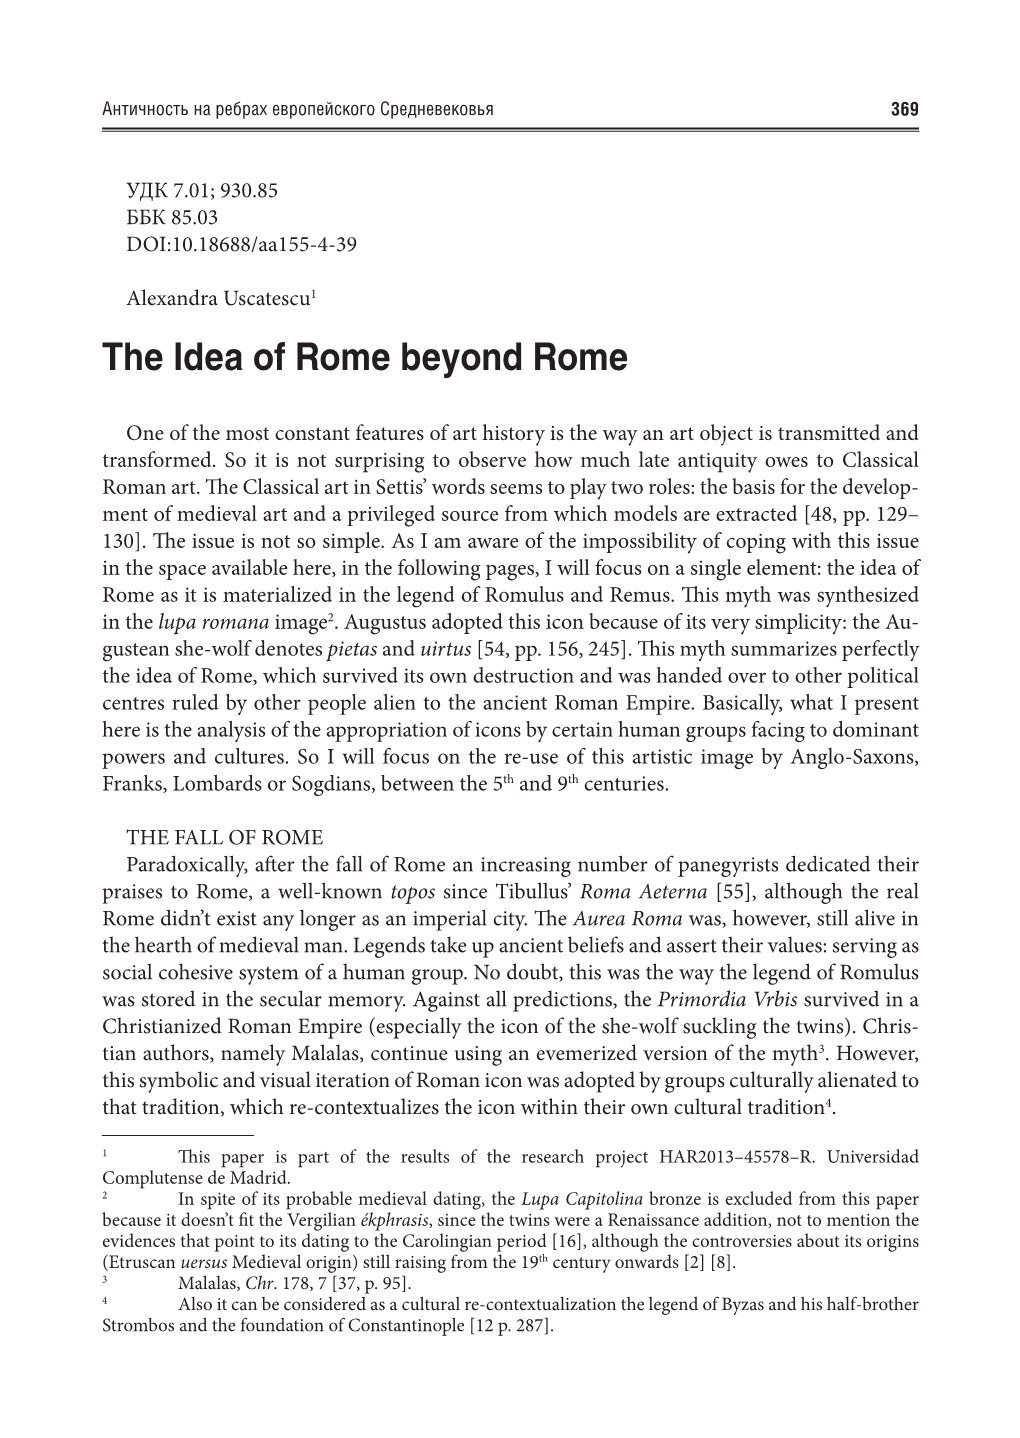 The Idea of Rome Beyond Rome